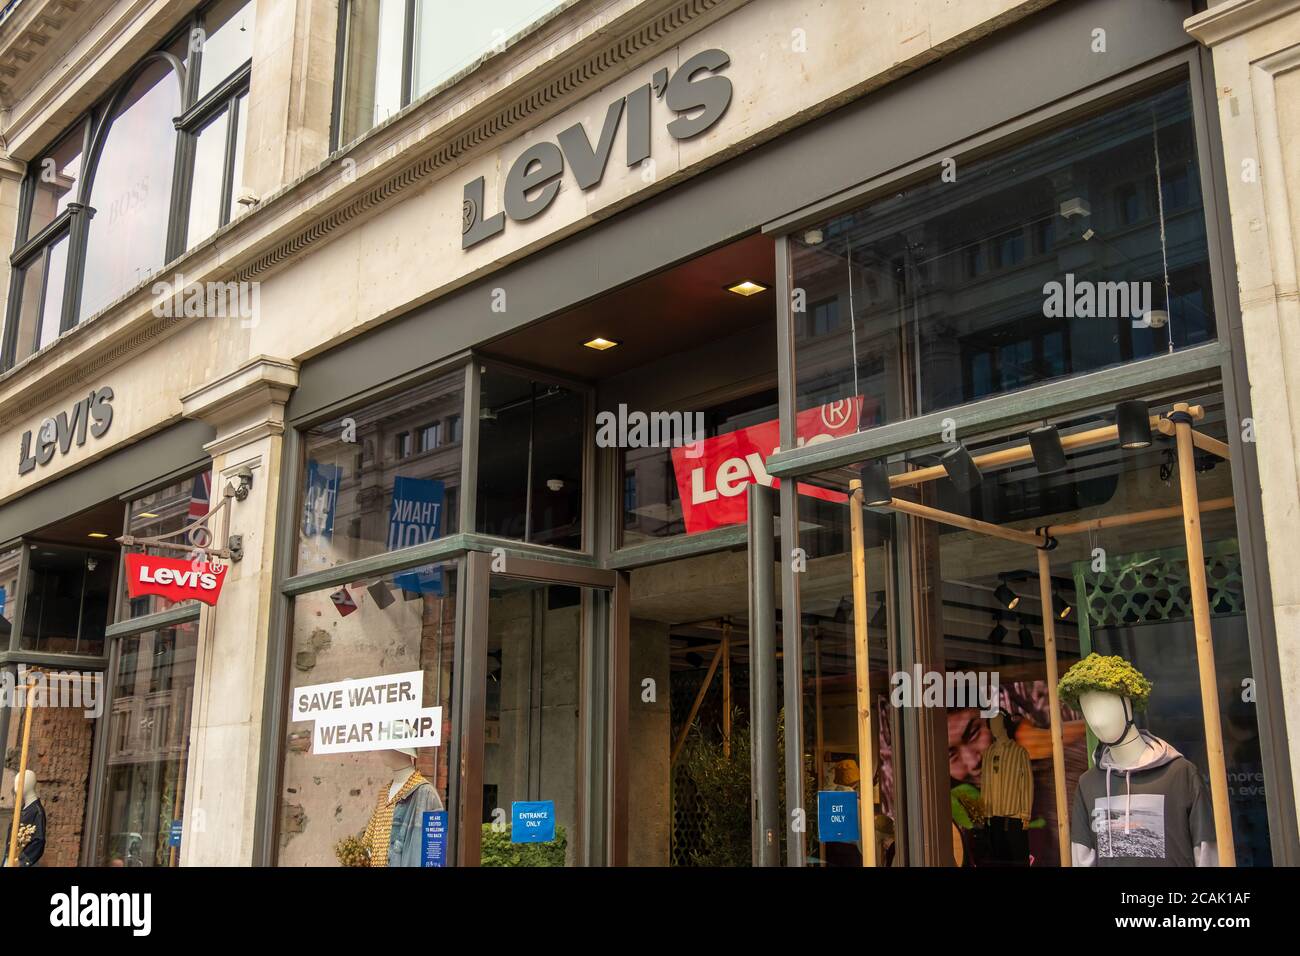 Levi's Jeans Shop High Resolution Stock 